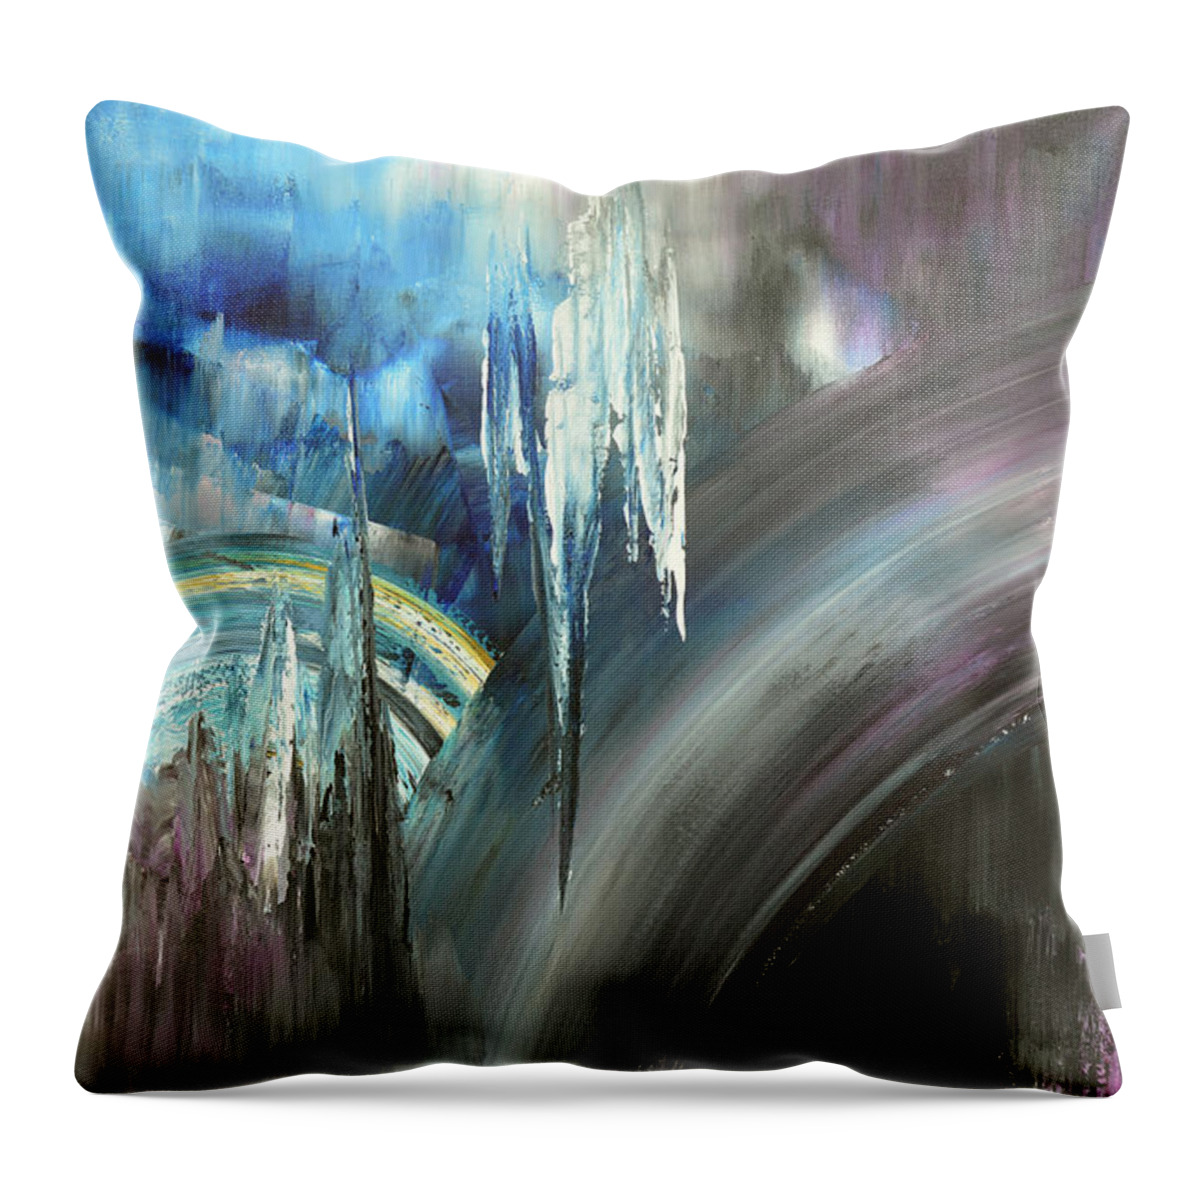 Abstract Throw Pillow featuring the painting Irresistible Impulses by Tatiana Iliina